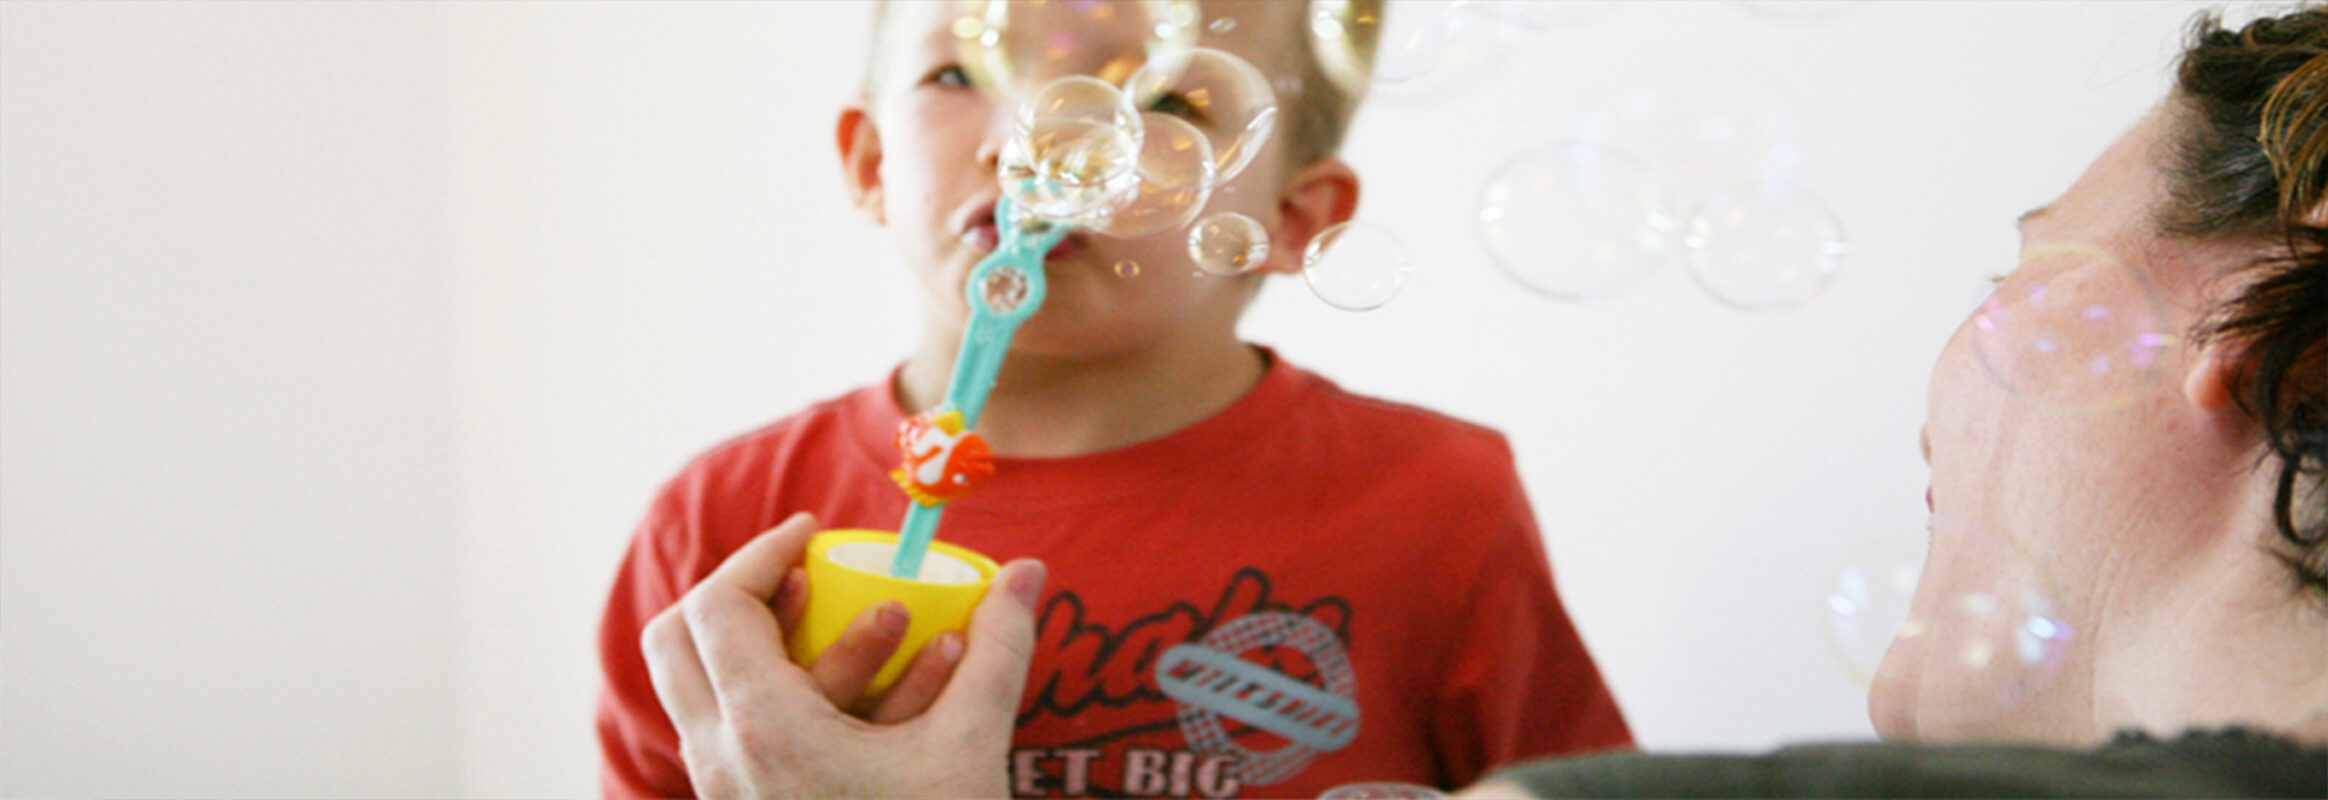 Young boy getting help for speech impediment with bubbles